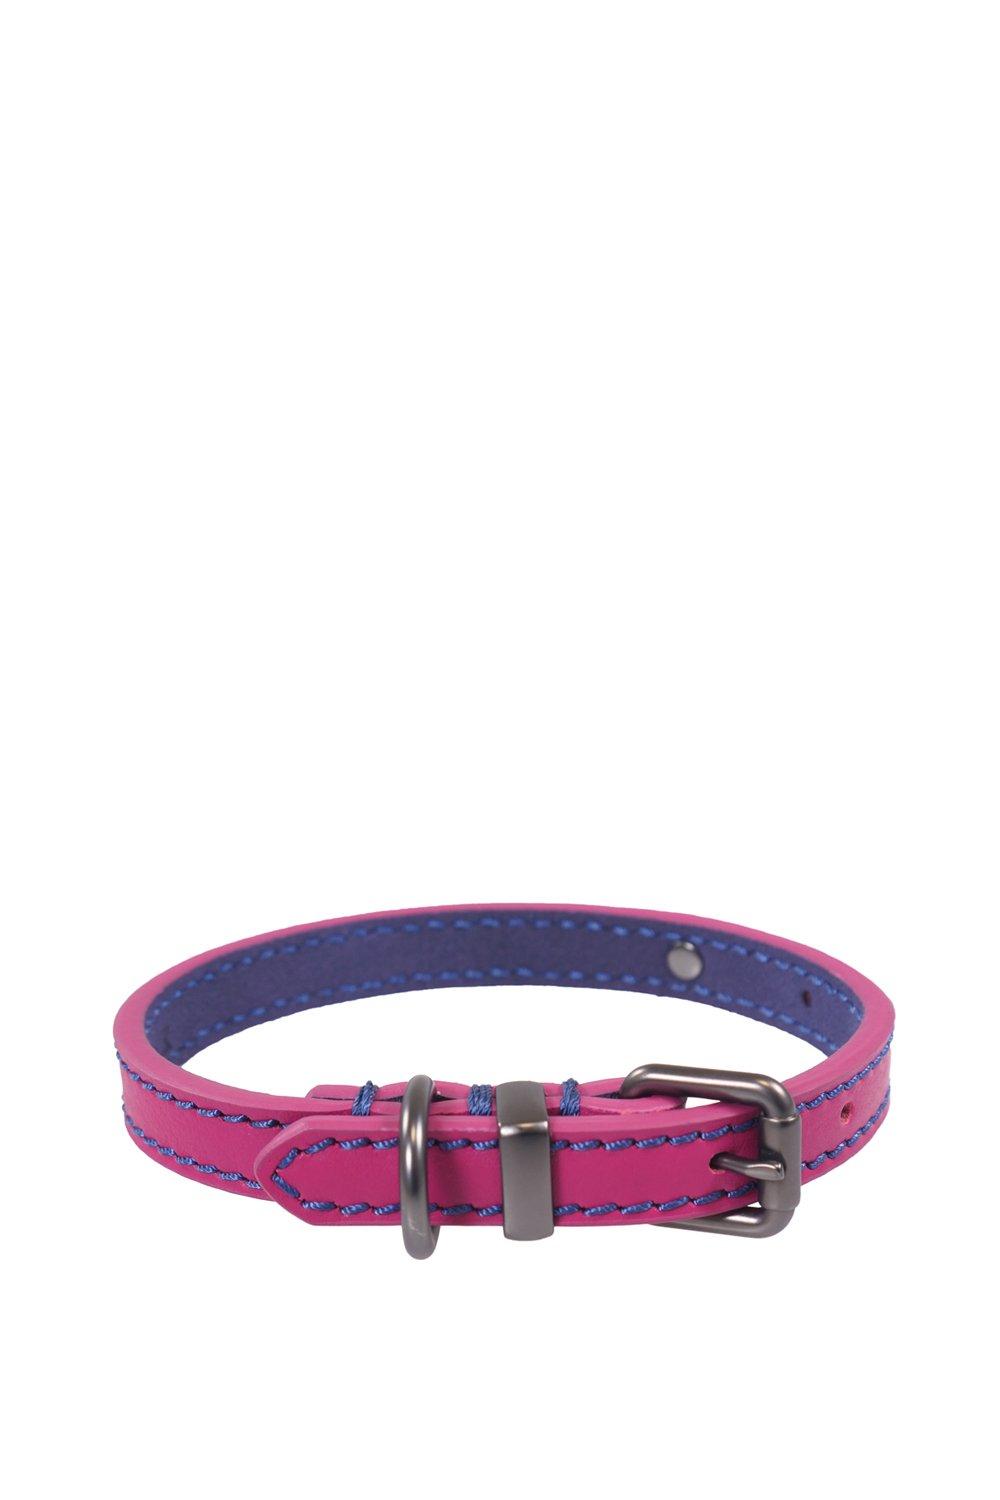 Picture of For Dapper Dogs Pink With Polka Dot Lining Leather Dog Collar Small